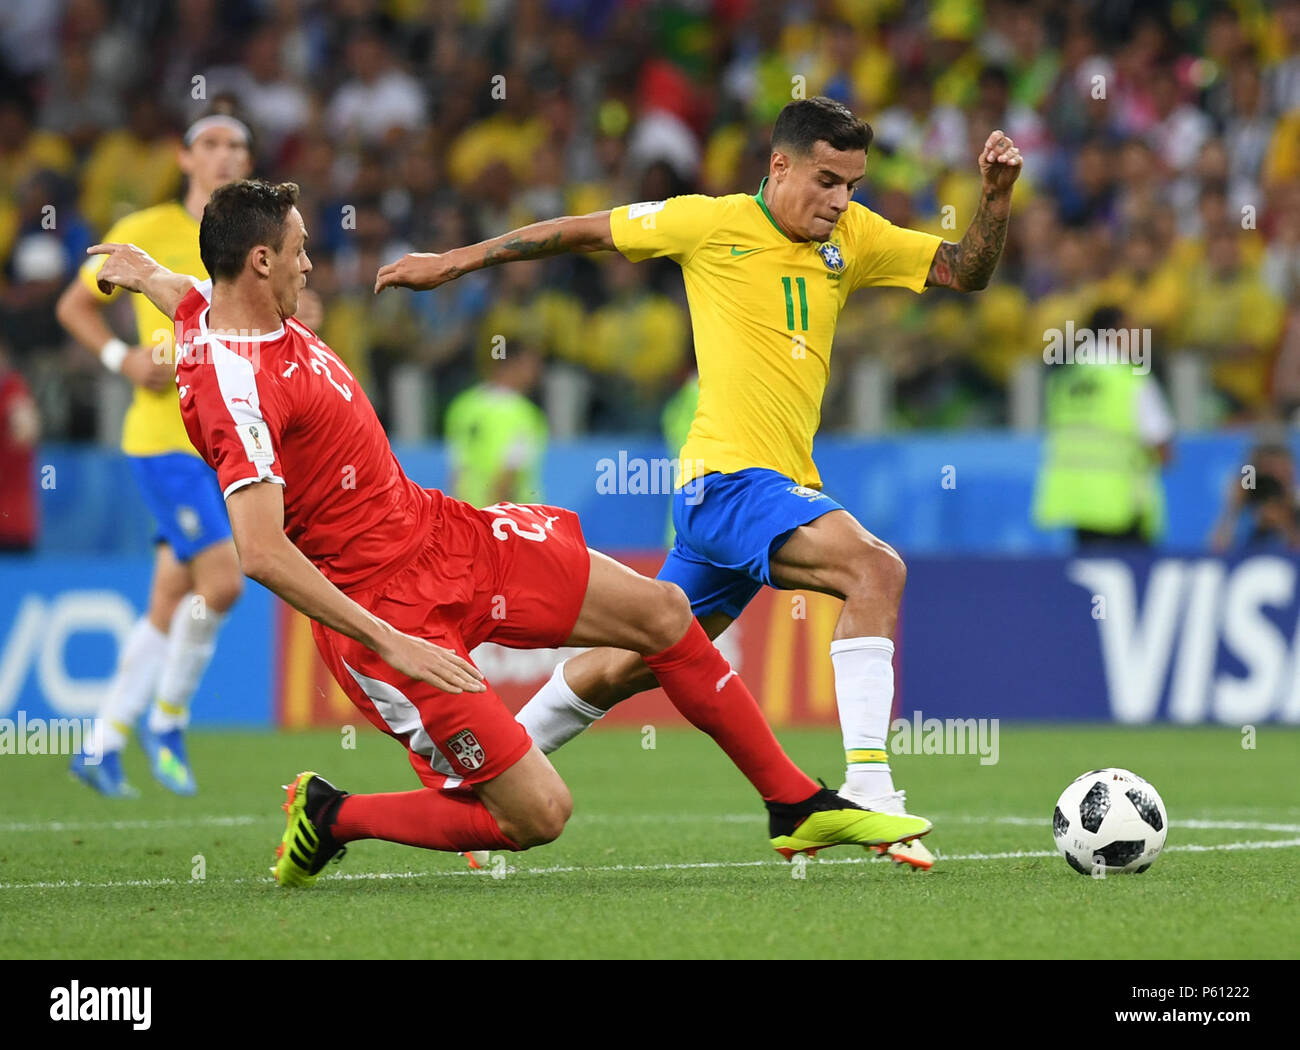 Moscow, Russia. 27th June, 2018. Philippe Coutinho (R) of Brazil vies with Nemanja Matic of Serbia during the 2018 FIFA World Cup Group E match between Brazil and Serbia in Moscow, Russia, June 27, 2018. Credit: Du Yu/Xinhua/Alamy Live News Stock Photo